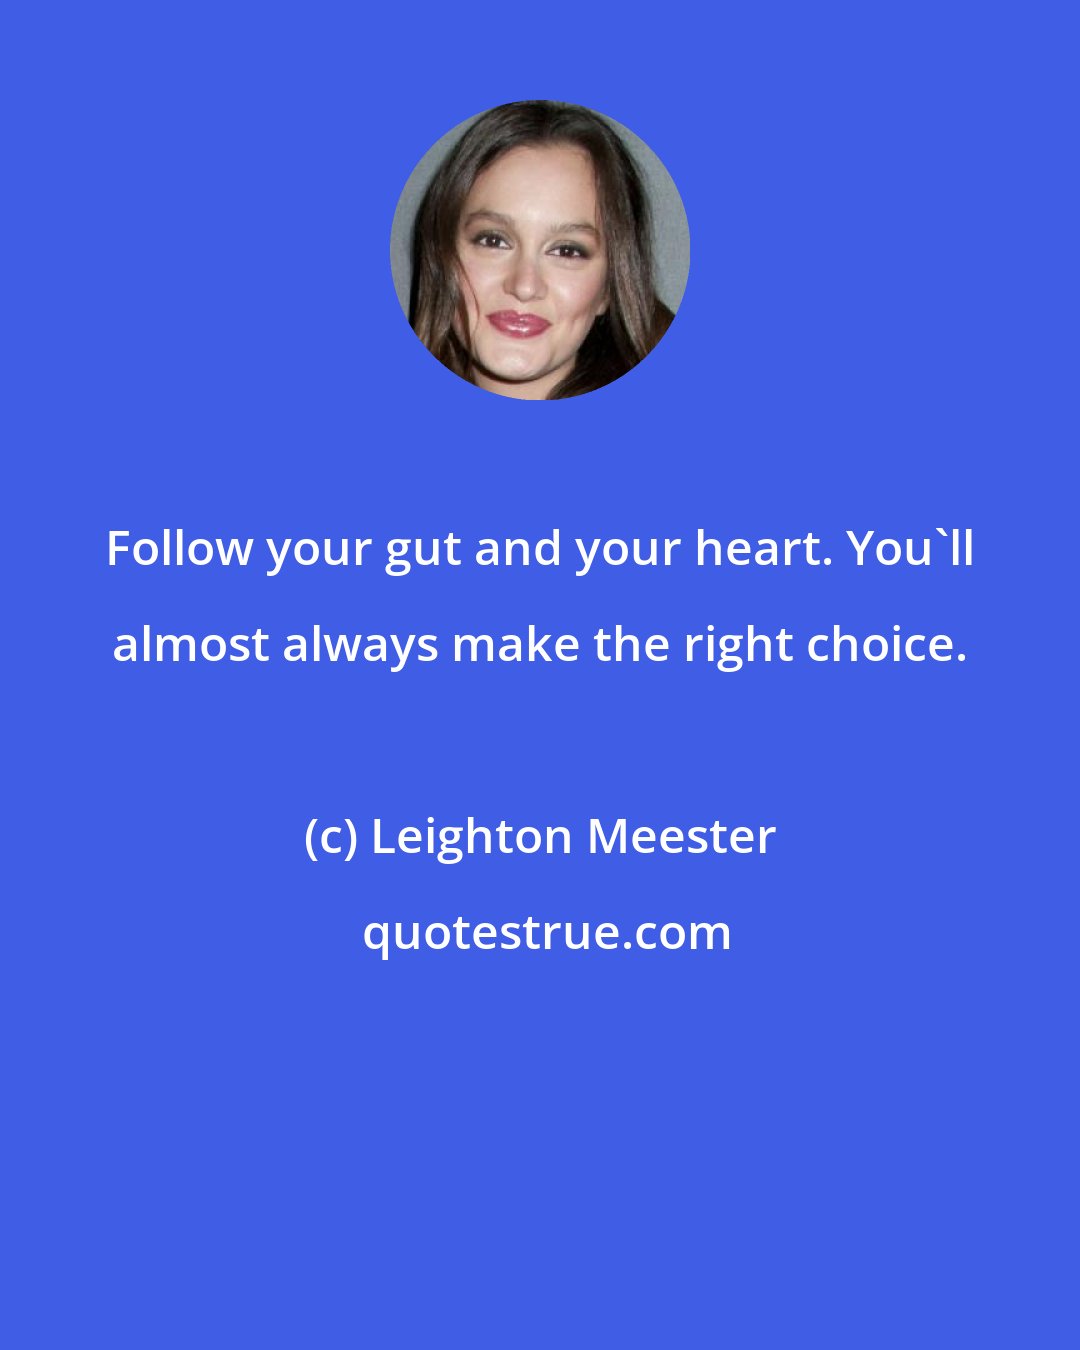 Leighton Meester: Follow your gut and your heart. You'll almost always make the right choice.